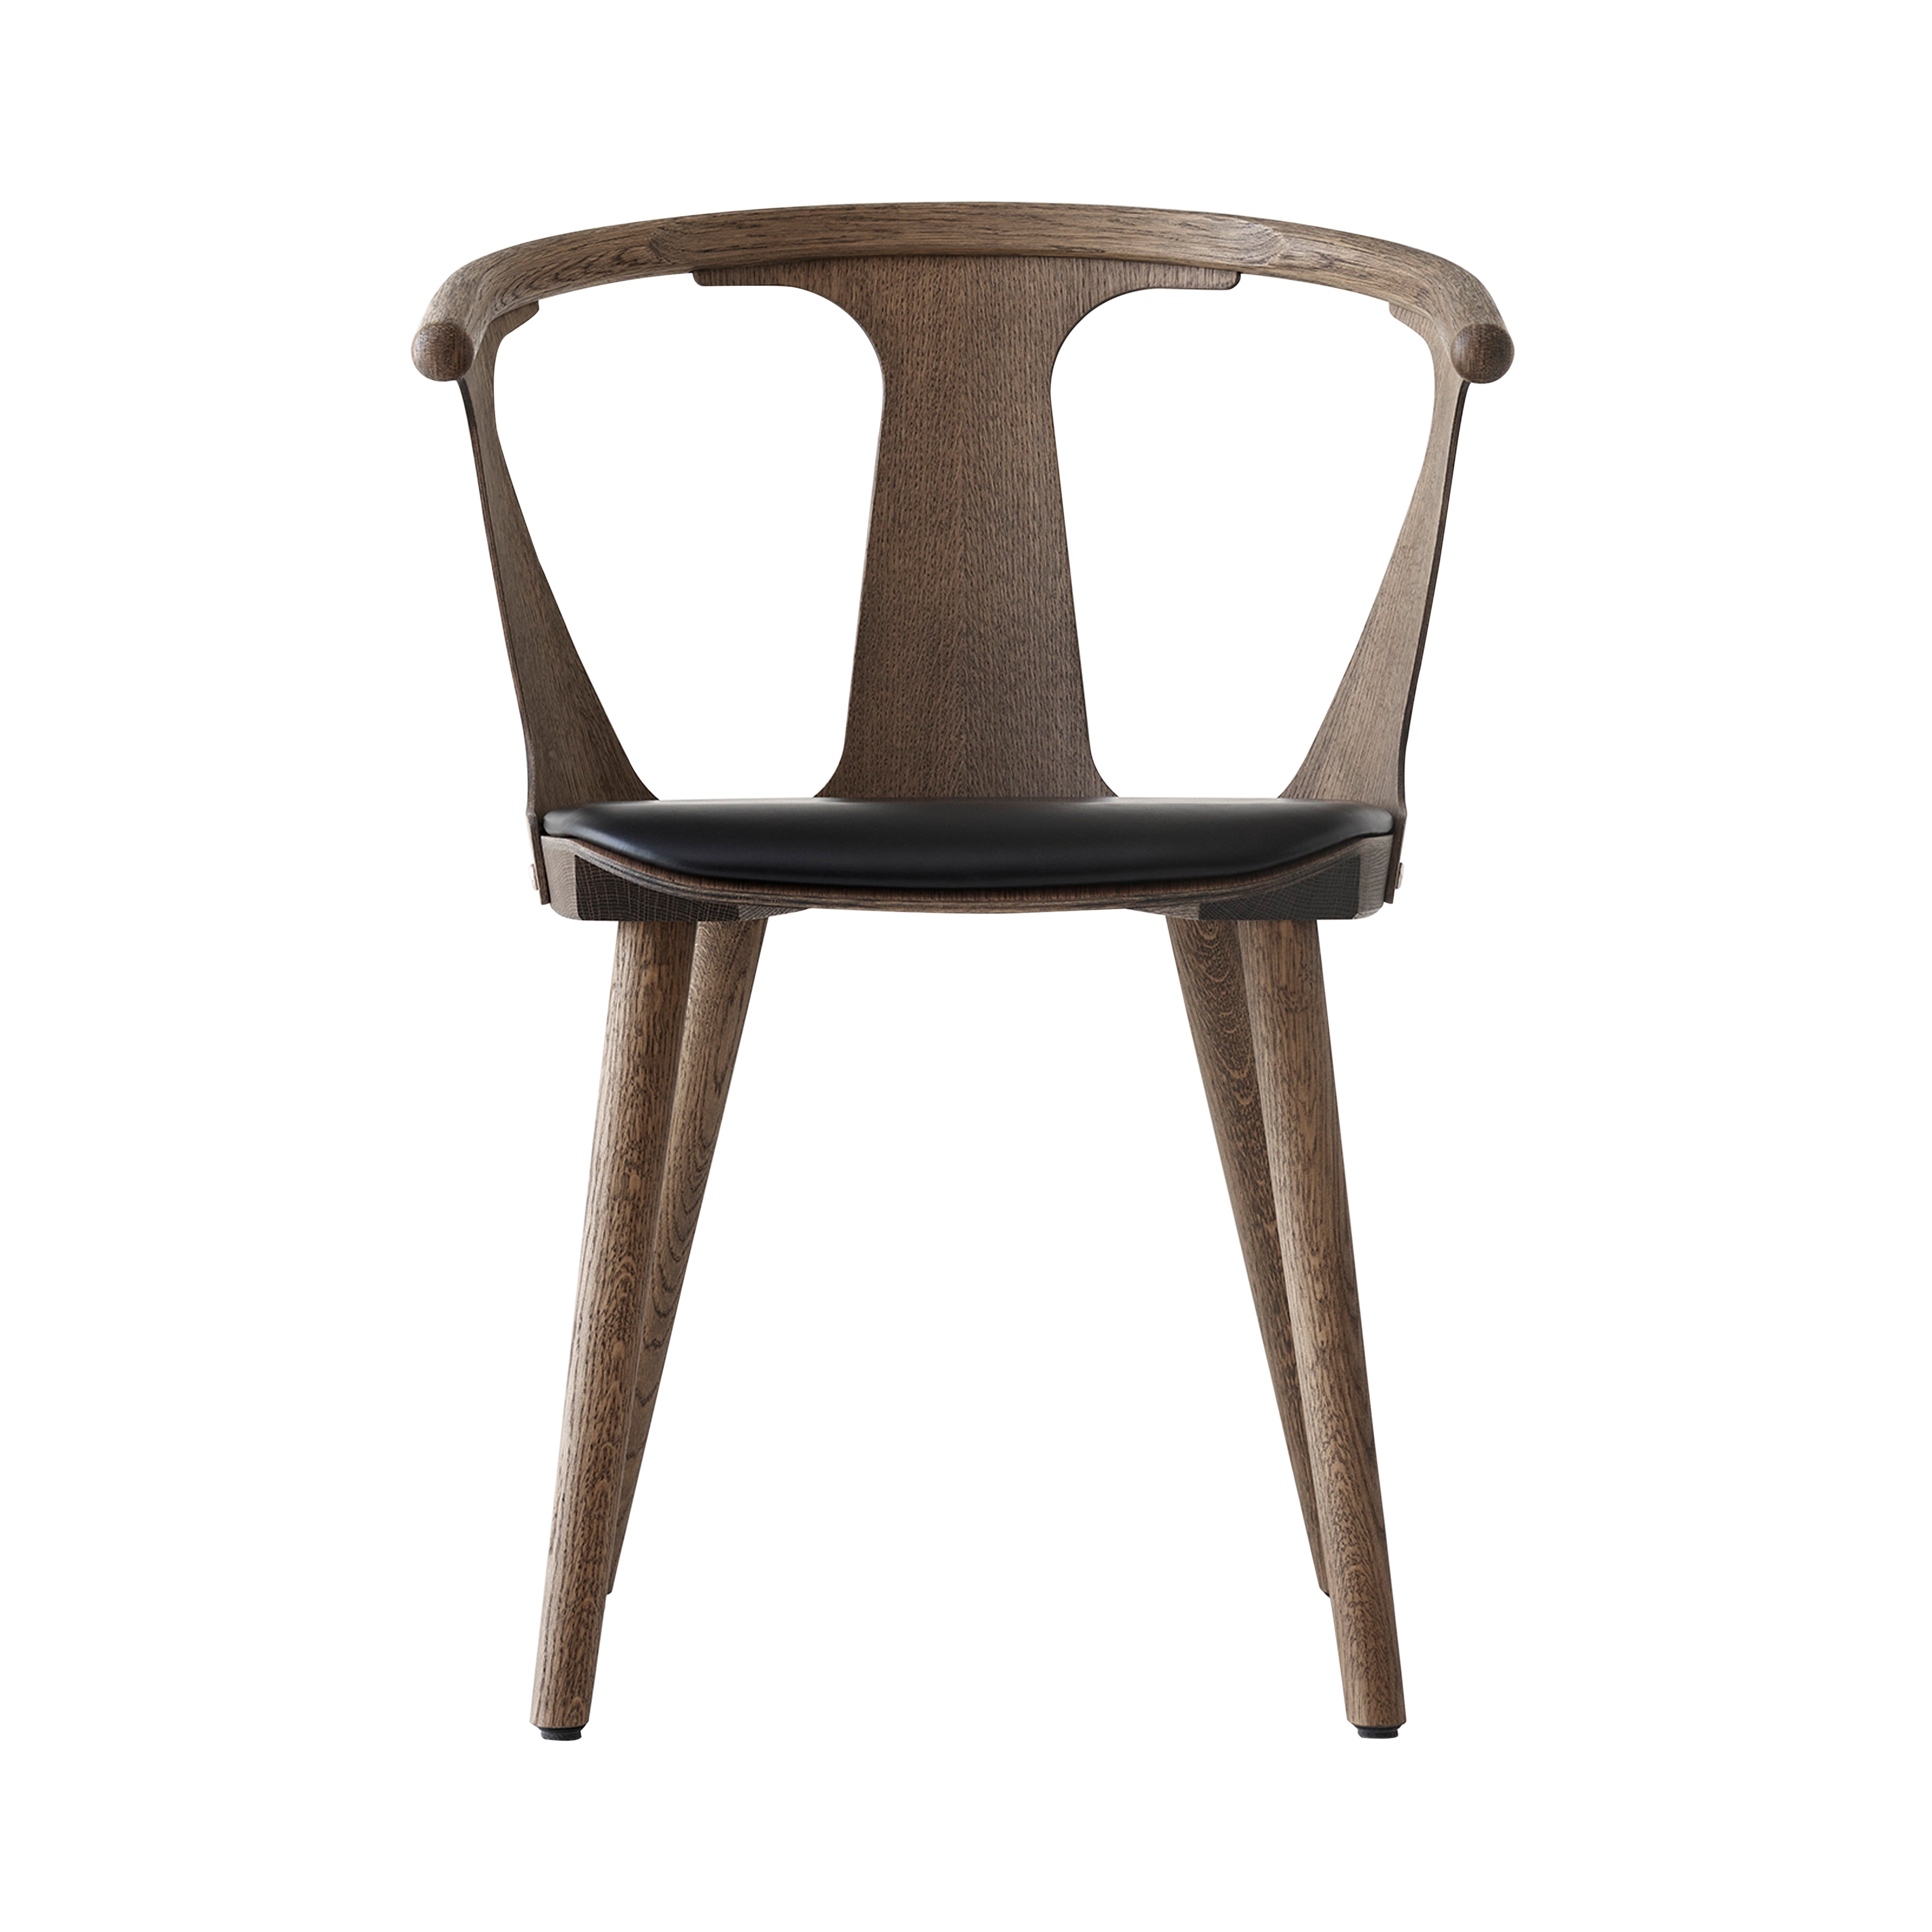 In Between Chair SK2: Upholstered + Smoked Oiled Oak